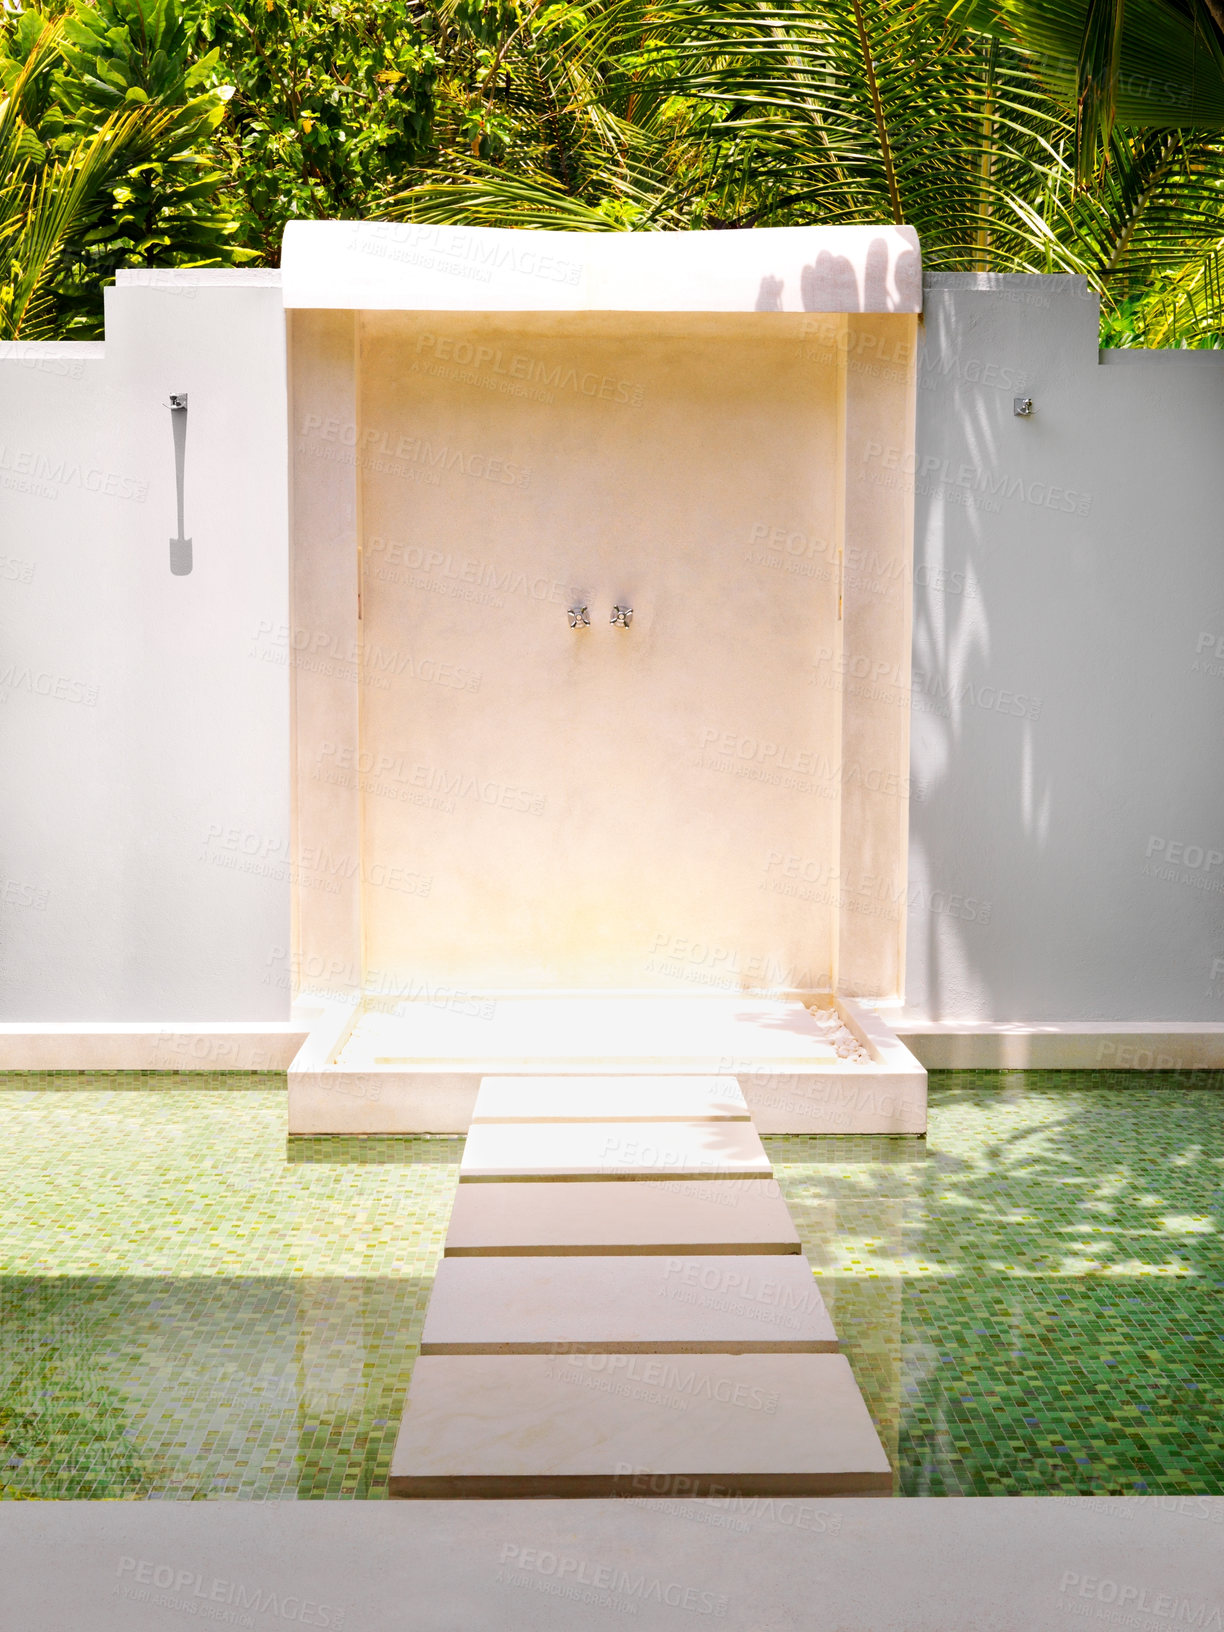 Buy stock photo An outdoor shower in a garden or resort with copyspace. Modern luxury showering facility with a stepping stone pathway across shallow water and copy space. Rinsing outdoors in nature at a spa 